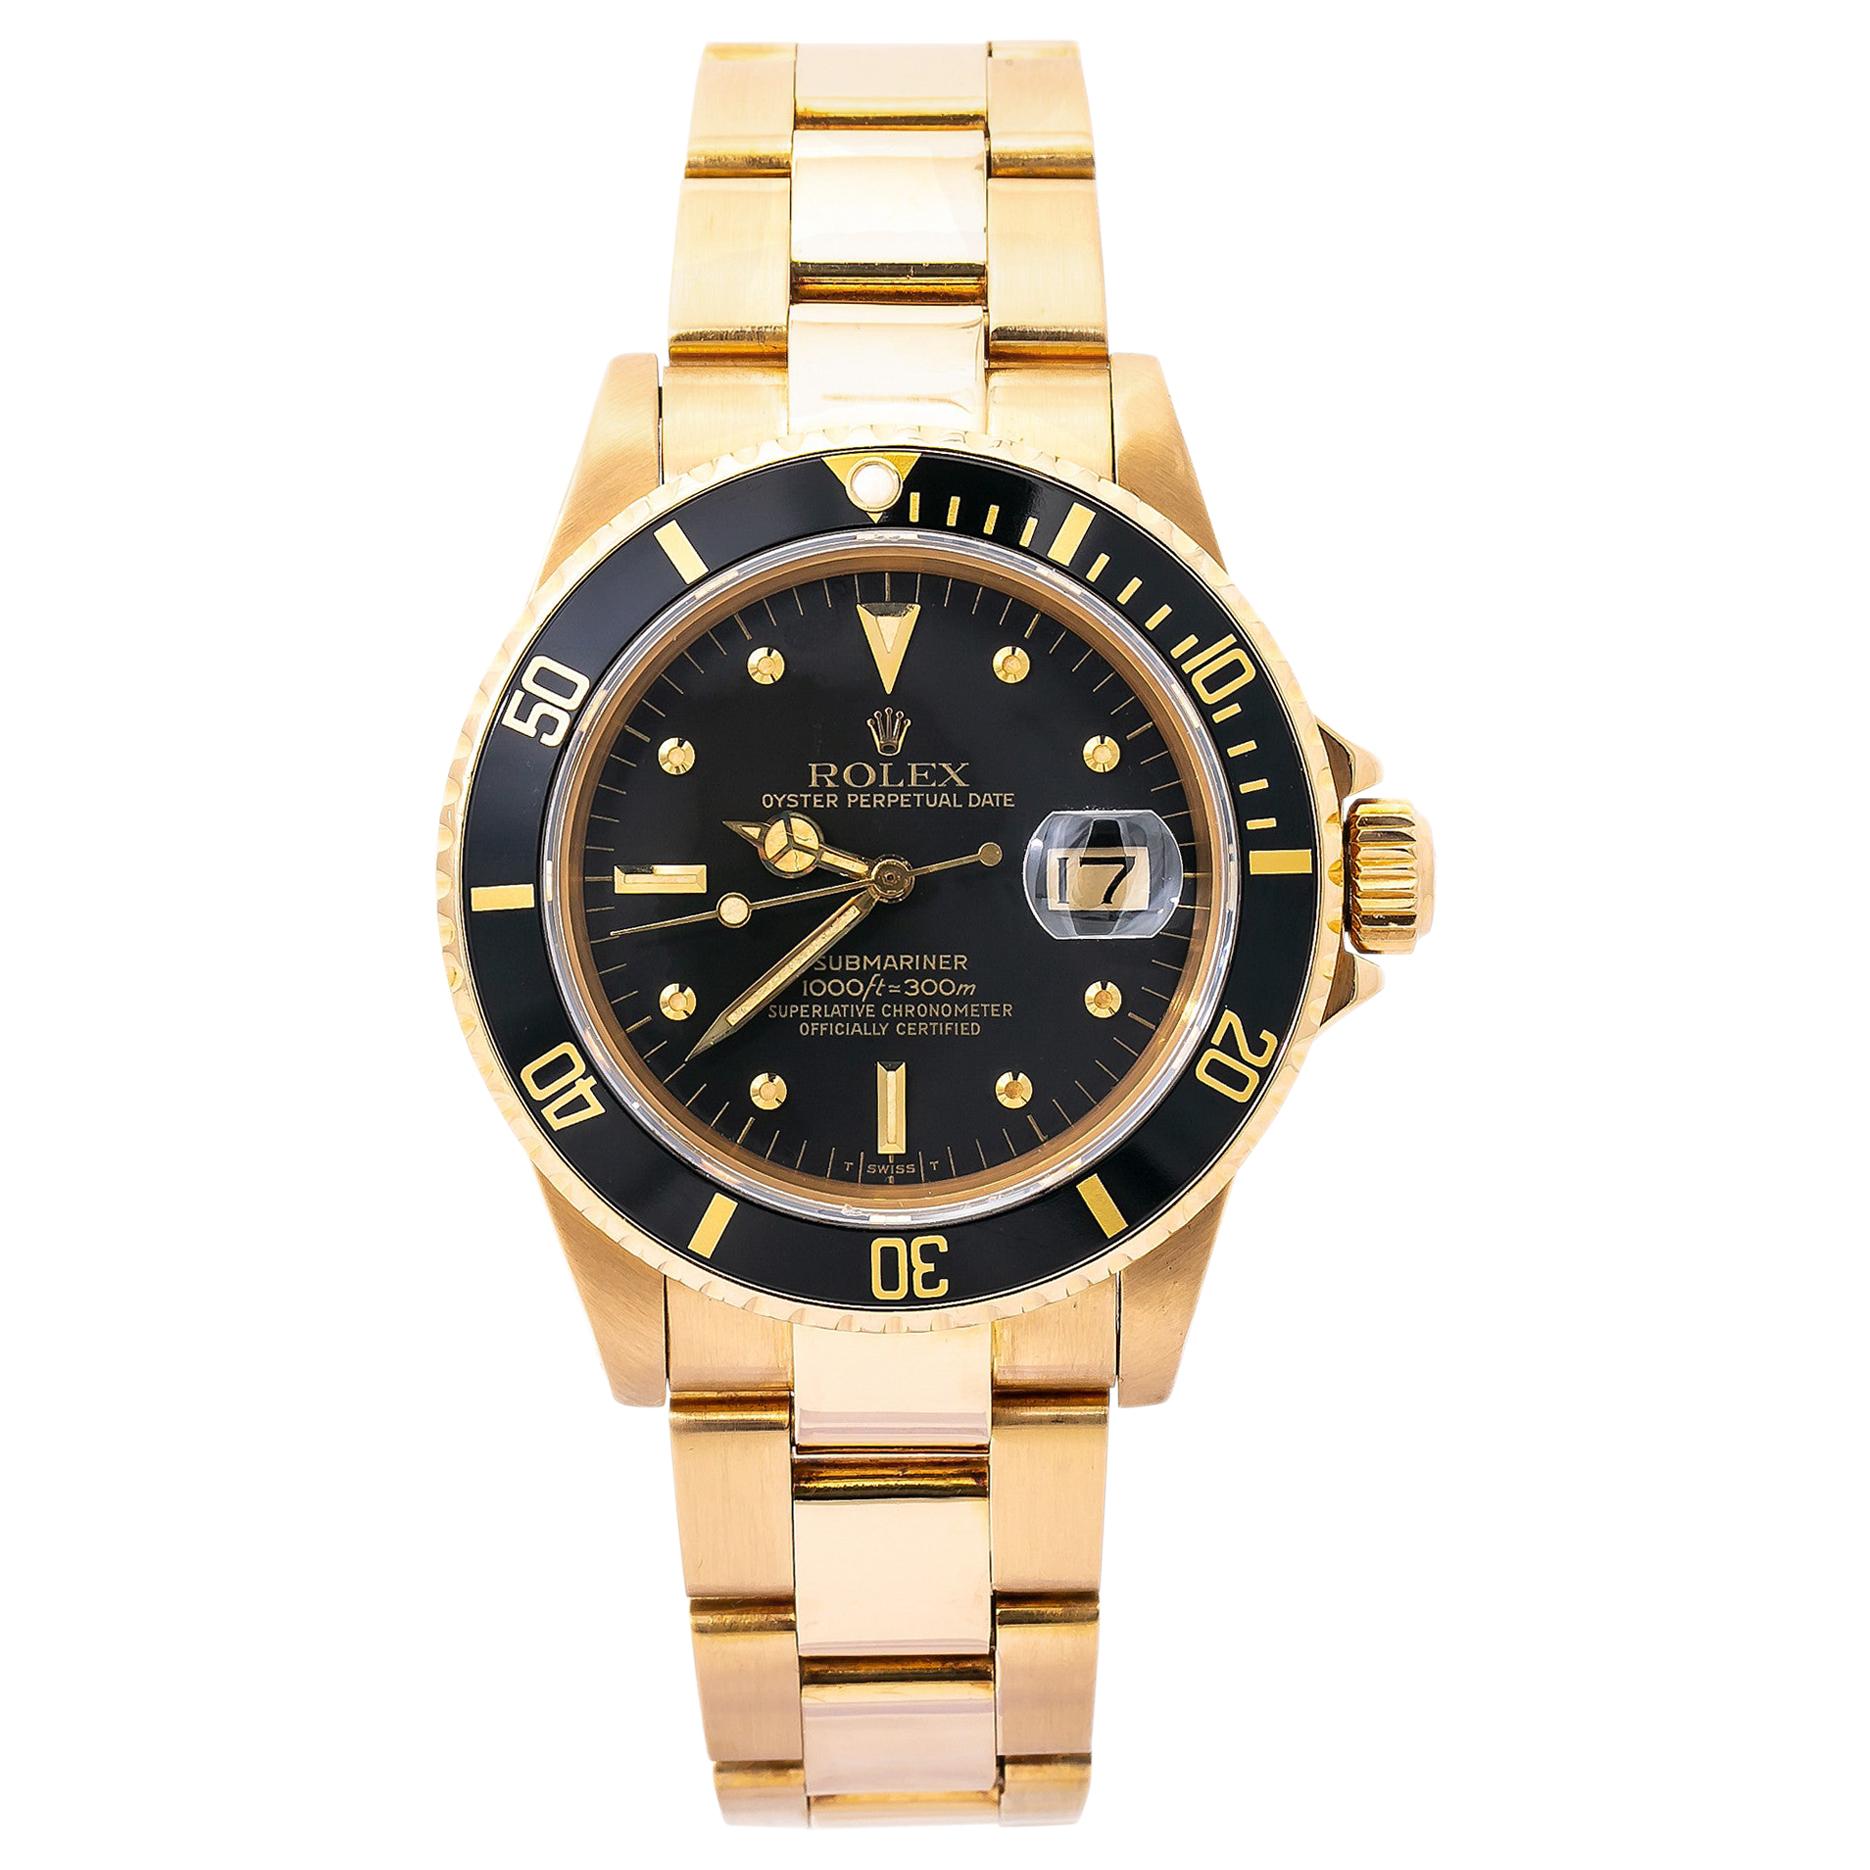 Rolex Submariner 16808, Black Dial, Certified and Warranty